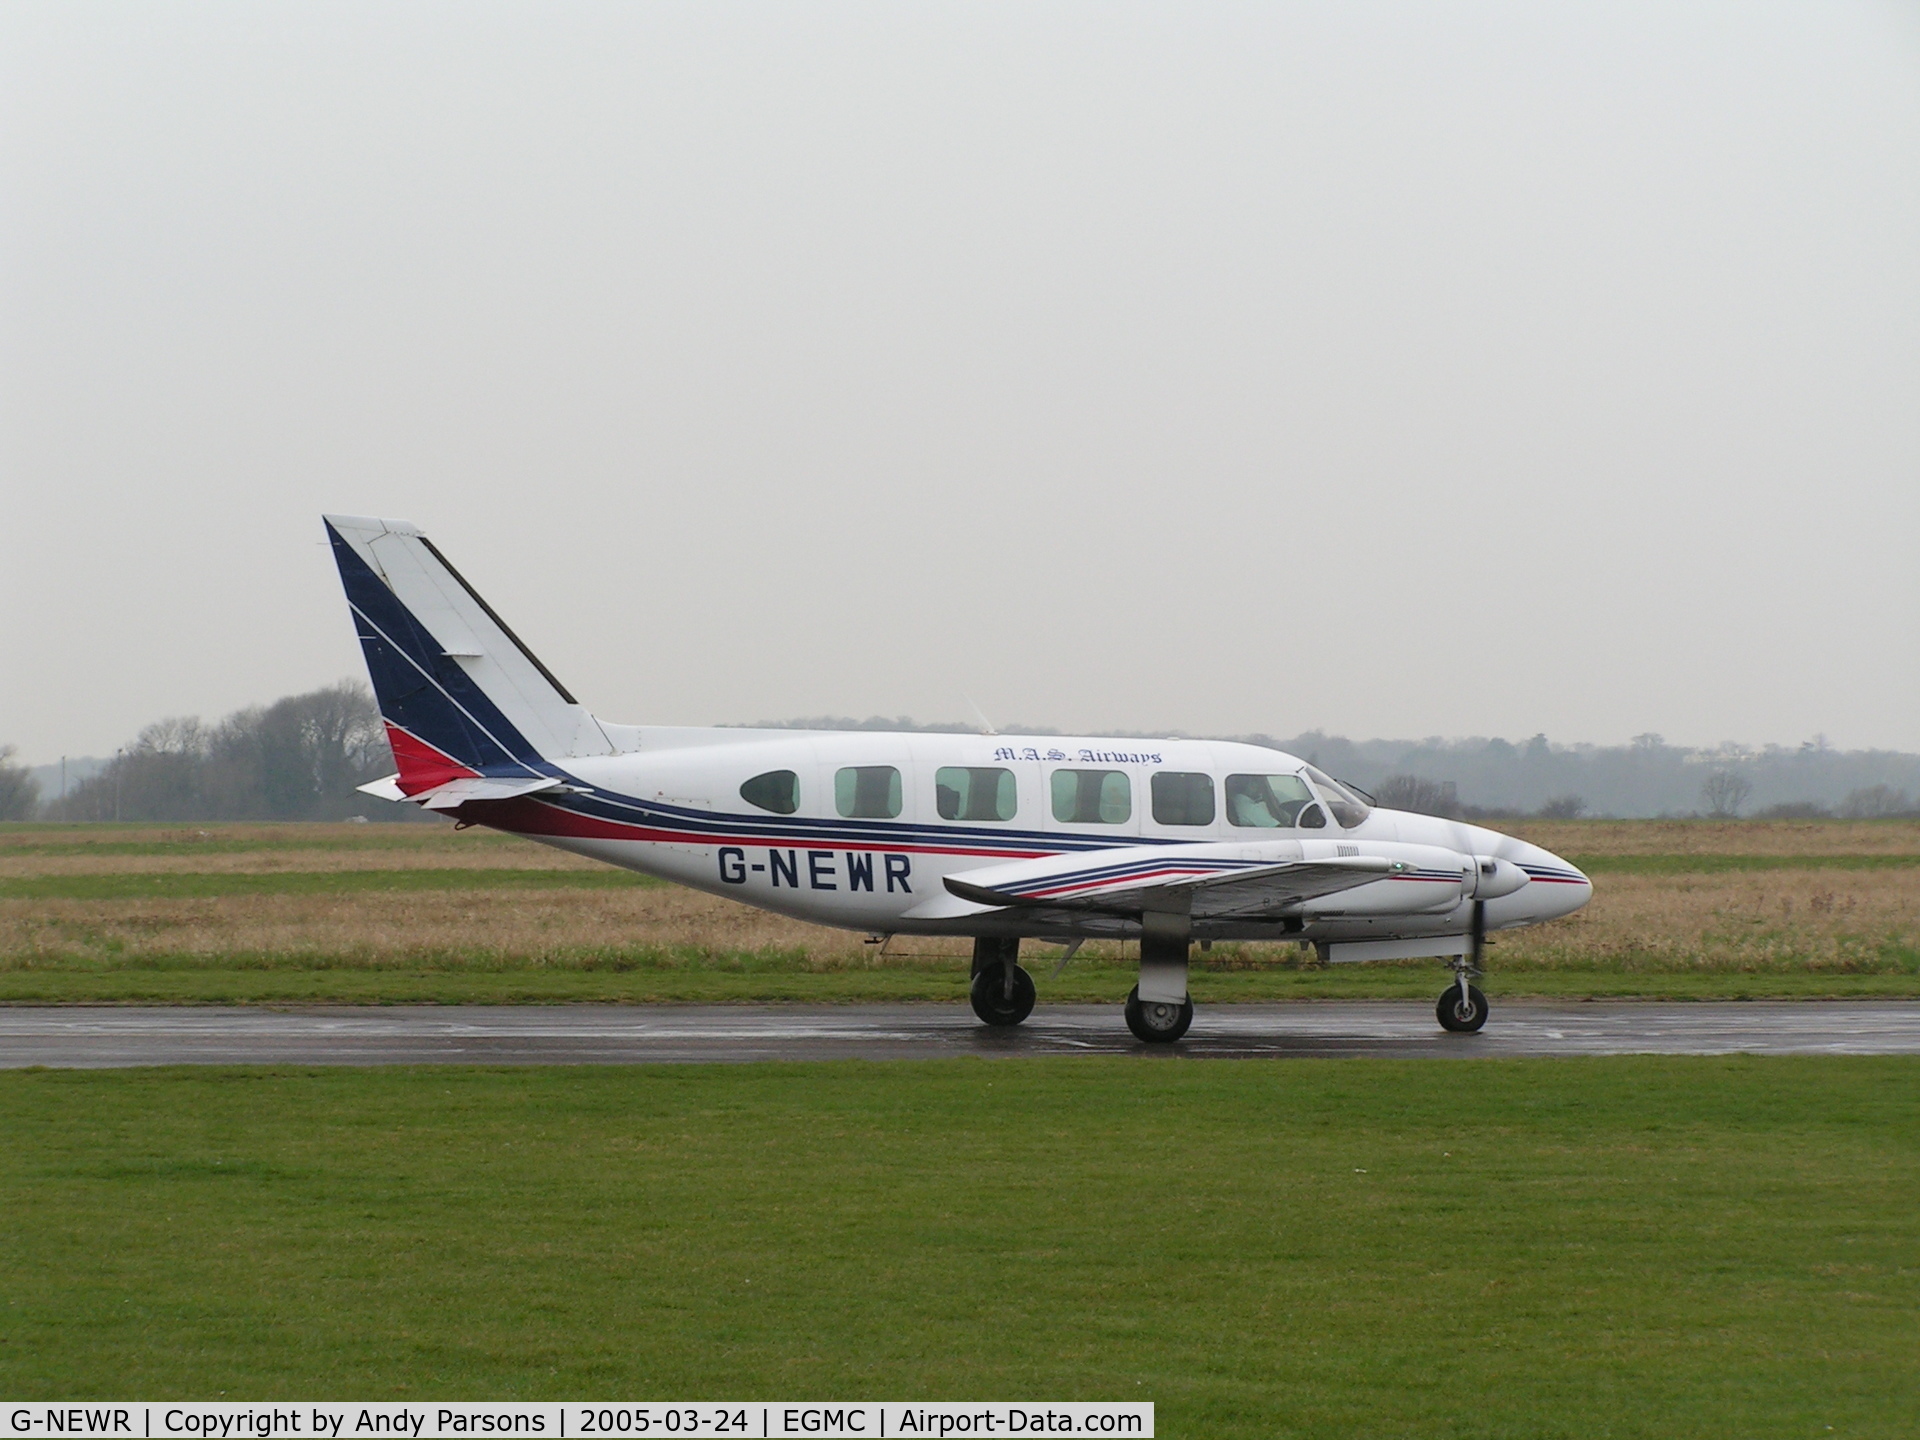 G-NEWR, 1979 Piper PA-31-350 Chieftain C/N 31-7952129, Departing Southend